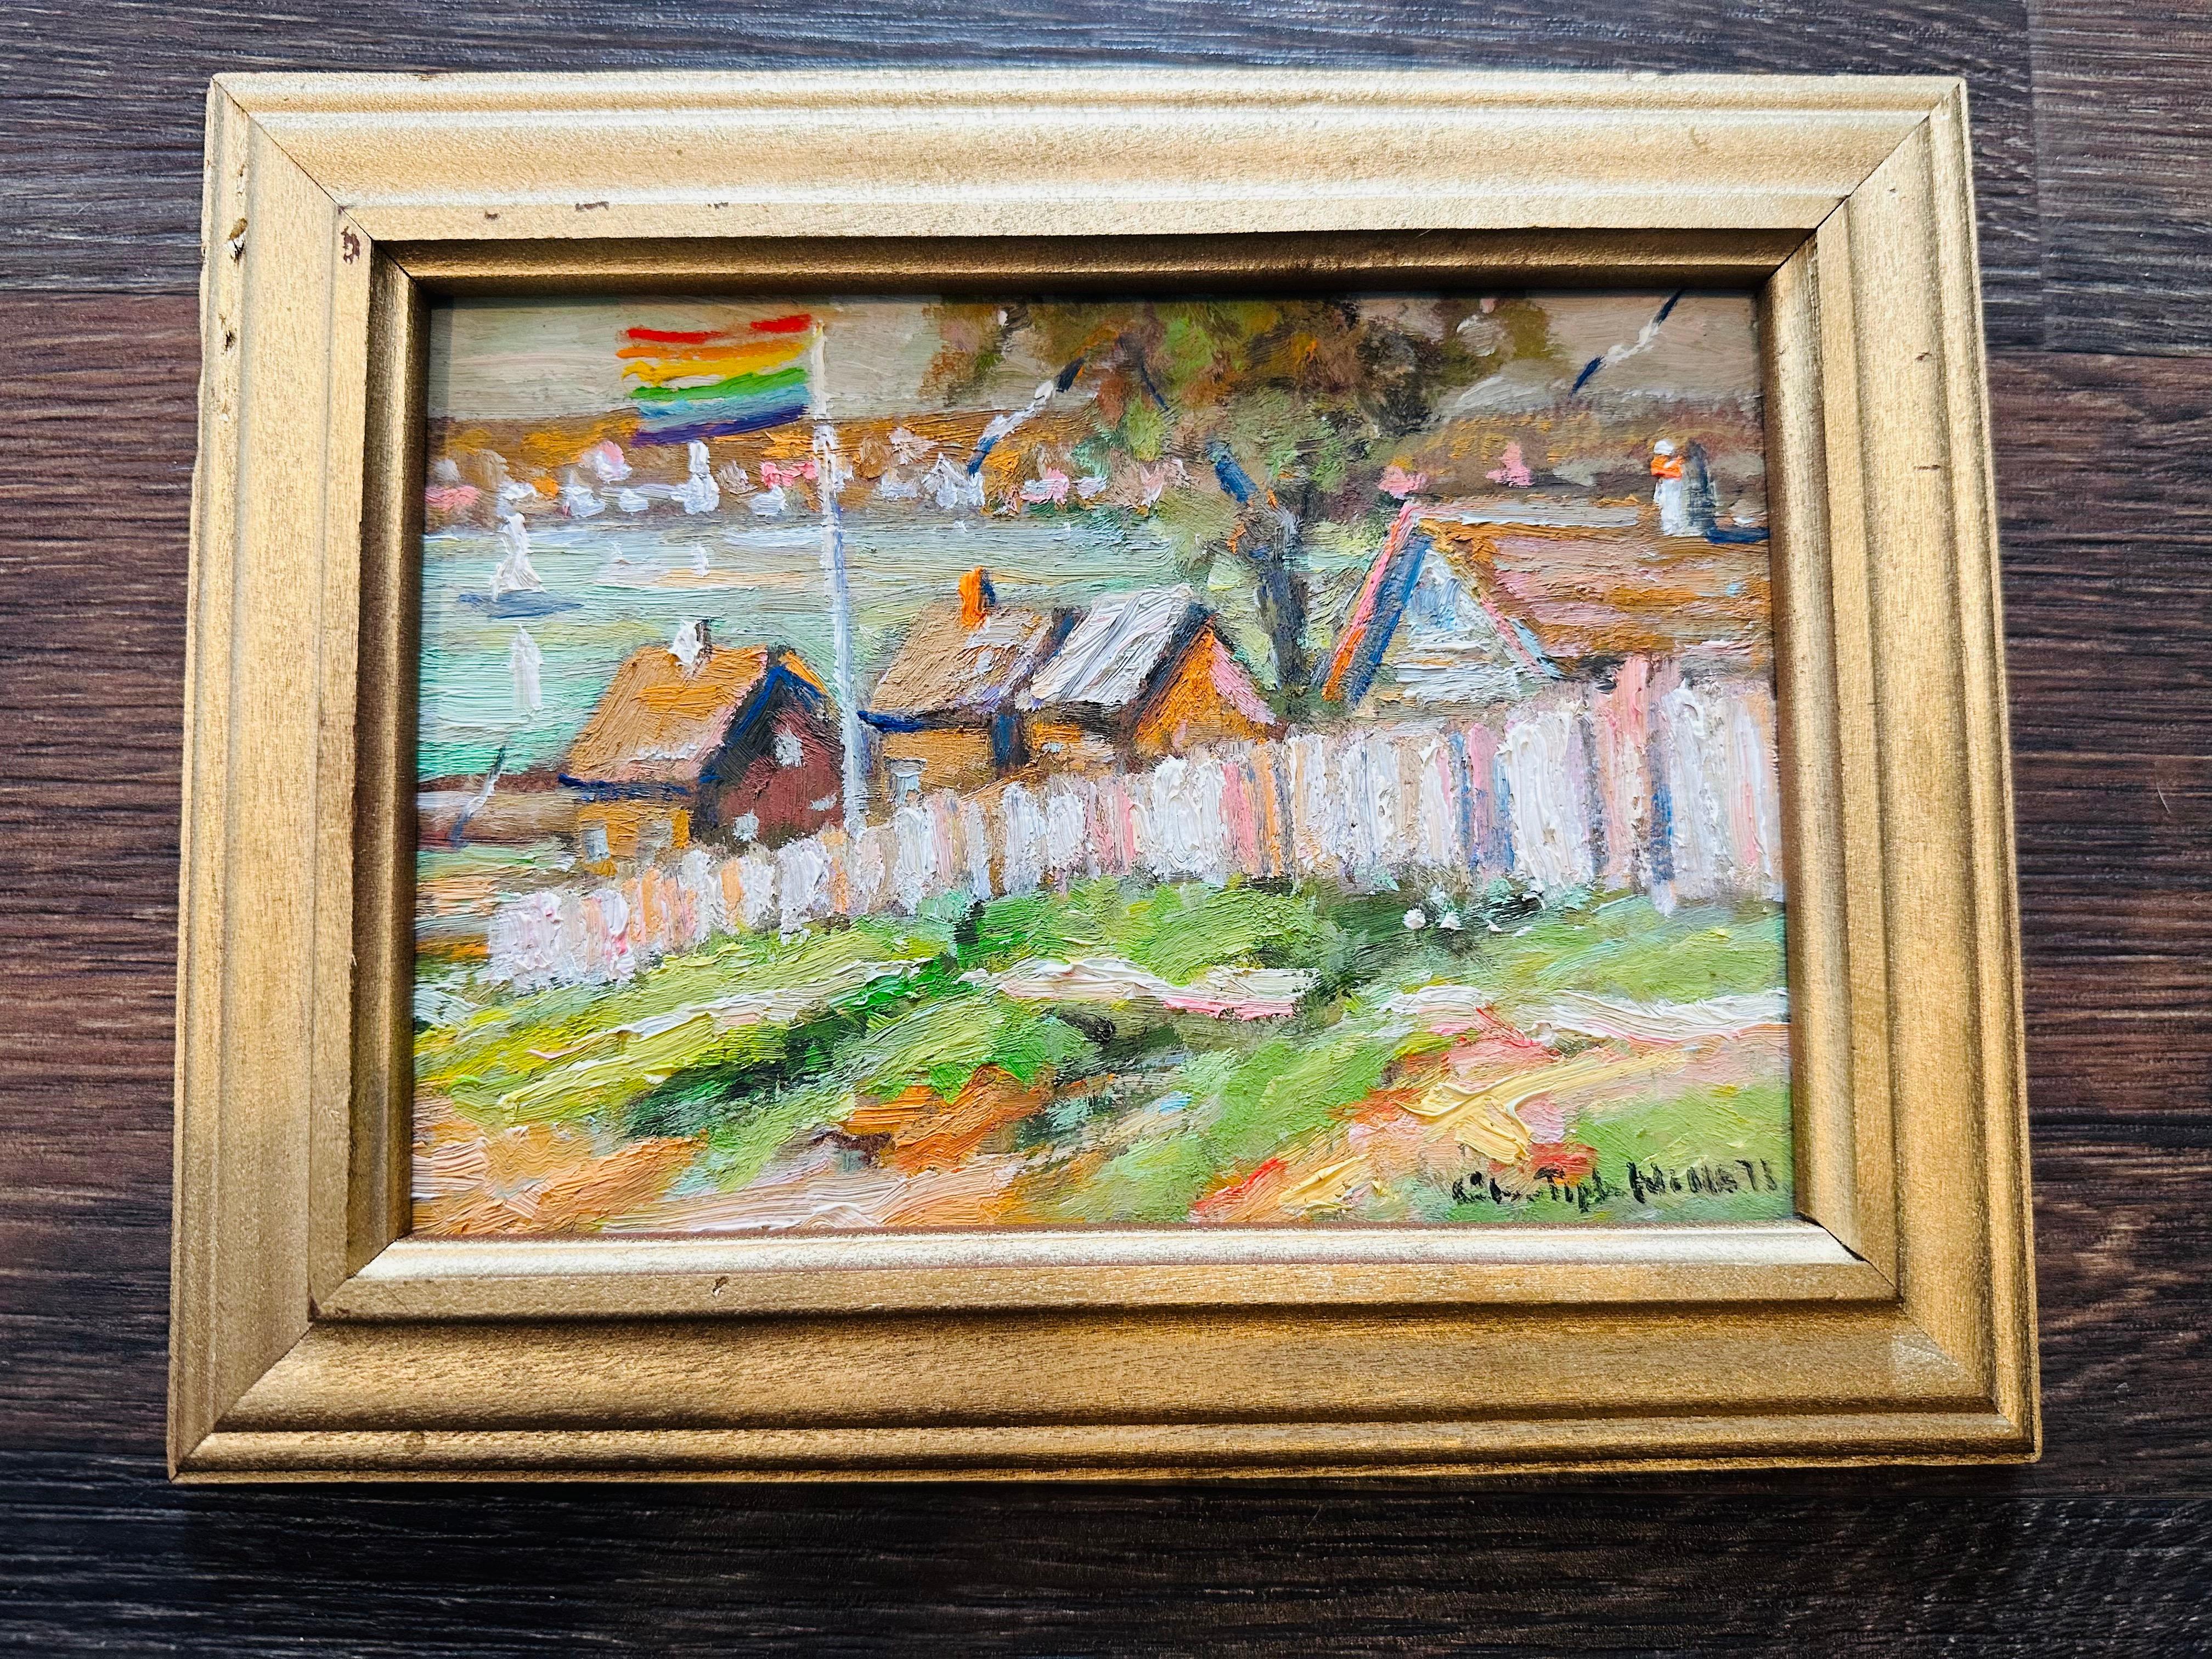 Impressionist large Provincetown Massachusetts - A sunny and prideful morning walk in Provincetown. Birds soaring over the hill, with sail boats drifting in the wind below. Centering an LGBTQ flag flowing gracefully in the summer sun. From early